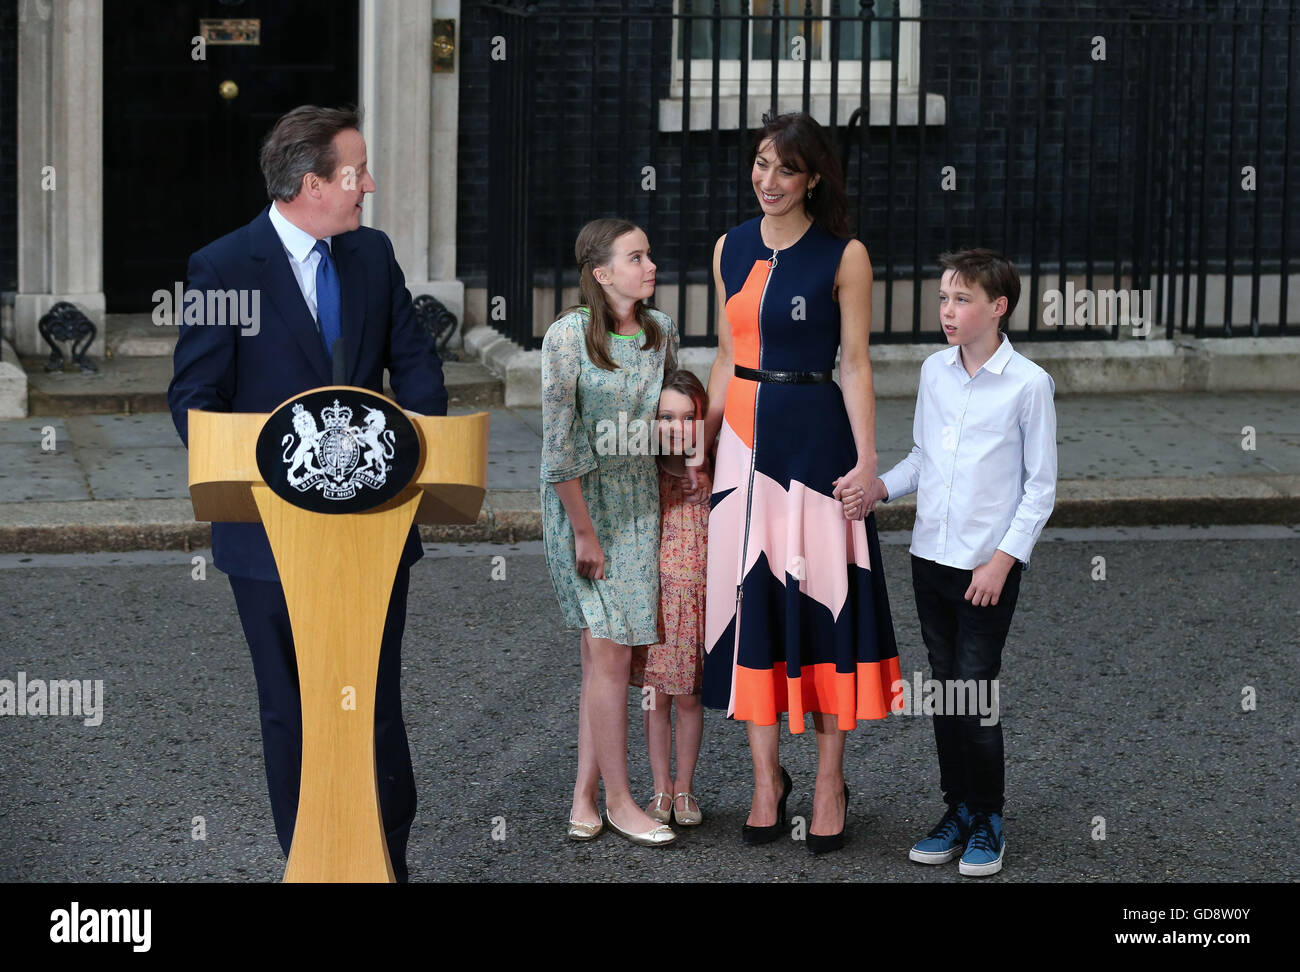 London, L) gives a speech before leaving 10 Downing Street in London. 13th July, 2016. British outgoing Prime Minister David Cameron(1st, L) gives a speech before leaving 10 Downing Street in London, Britain on July 13, 2016. Cameron bid farewell to 10 Downing Street and headed to Buckingham Palace to offer his resignation to Queen Elizabeth II on Wednesday afternoon. Credit:  Han Yan/Xinhua/Alamy Live News Stock Photo